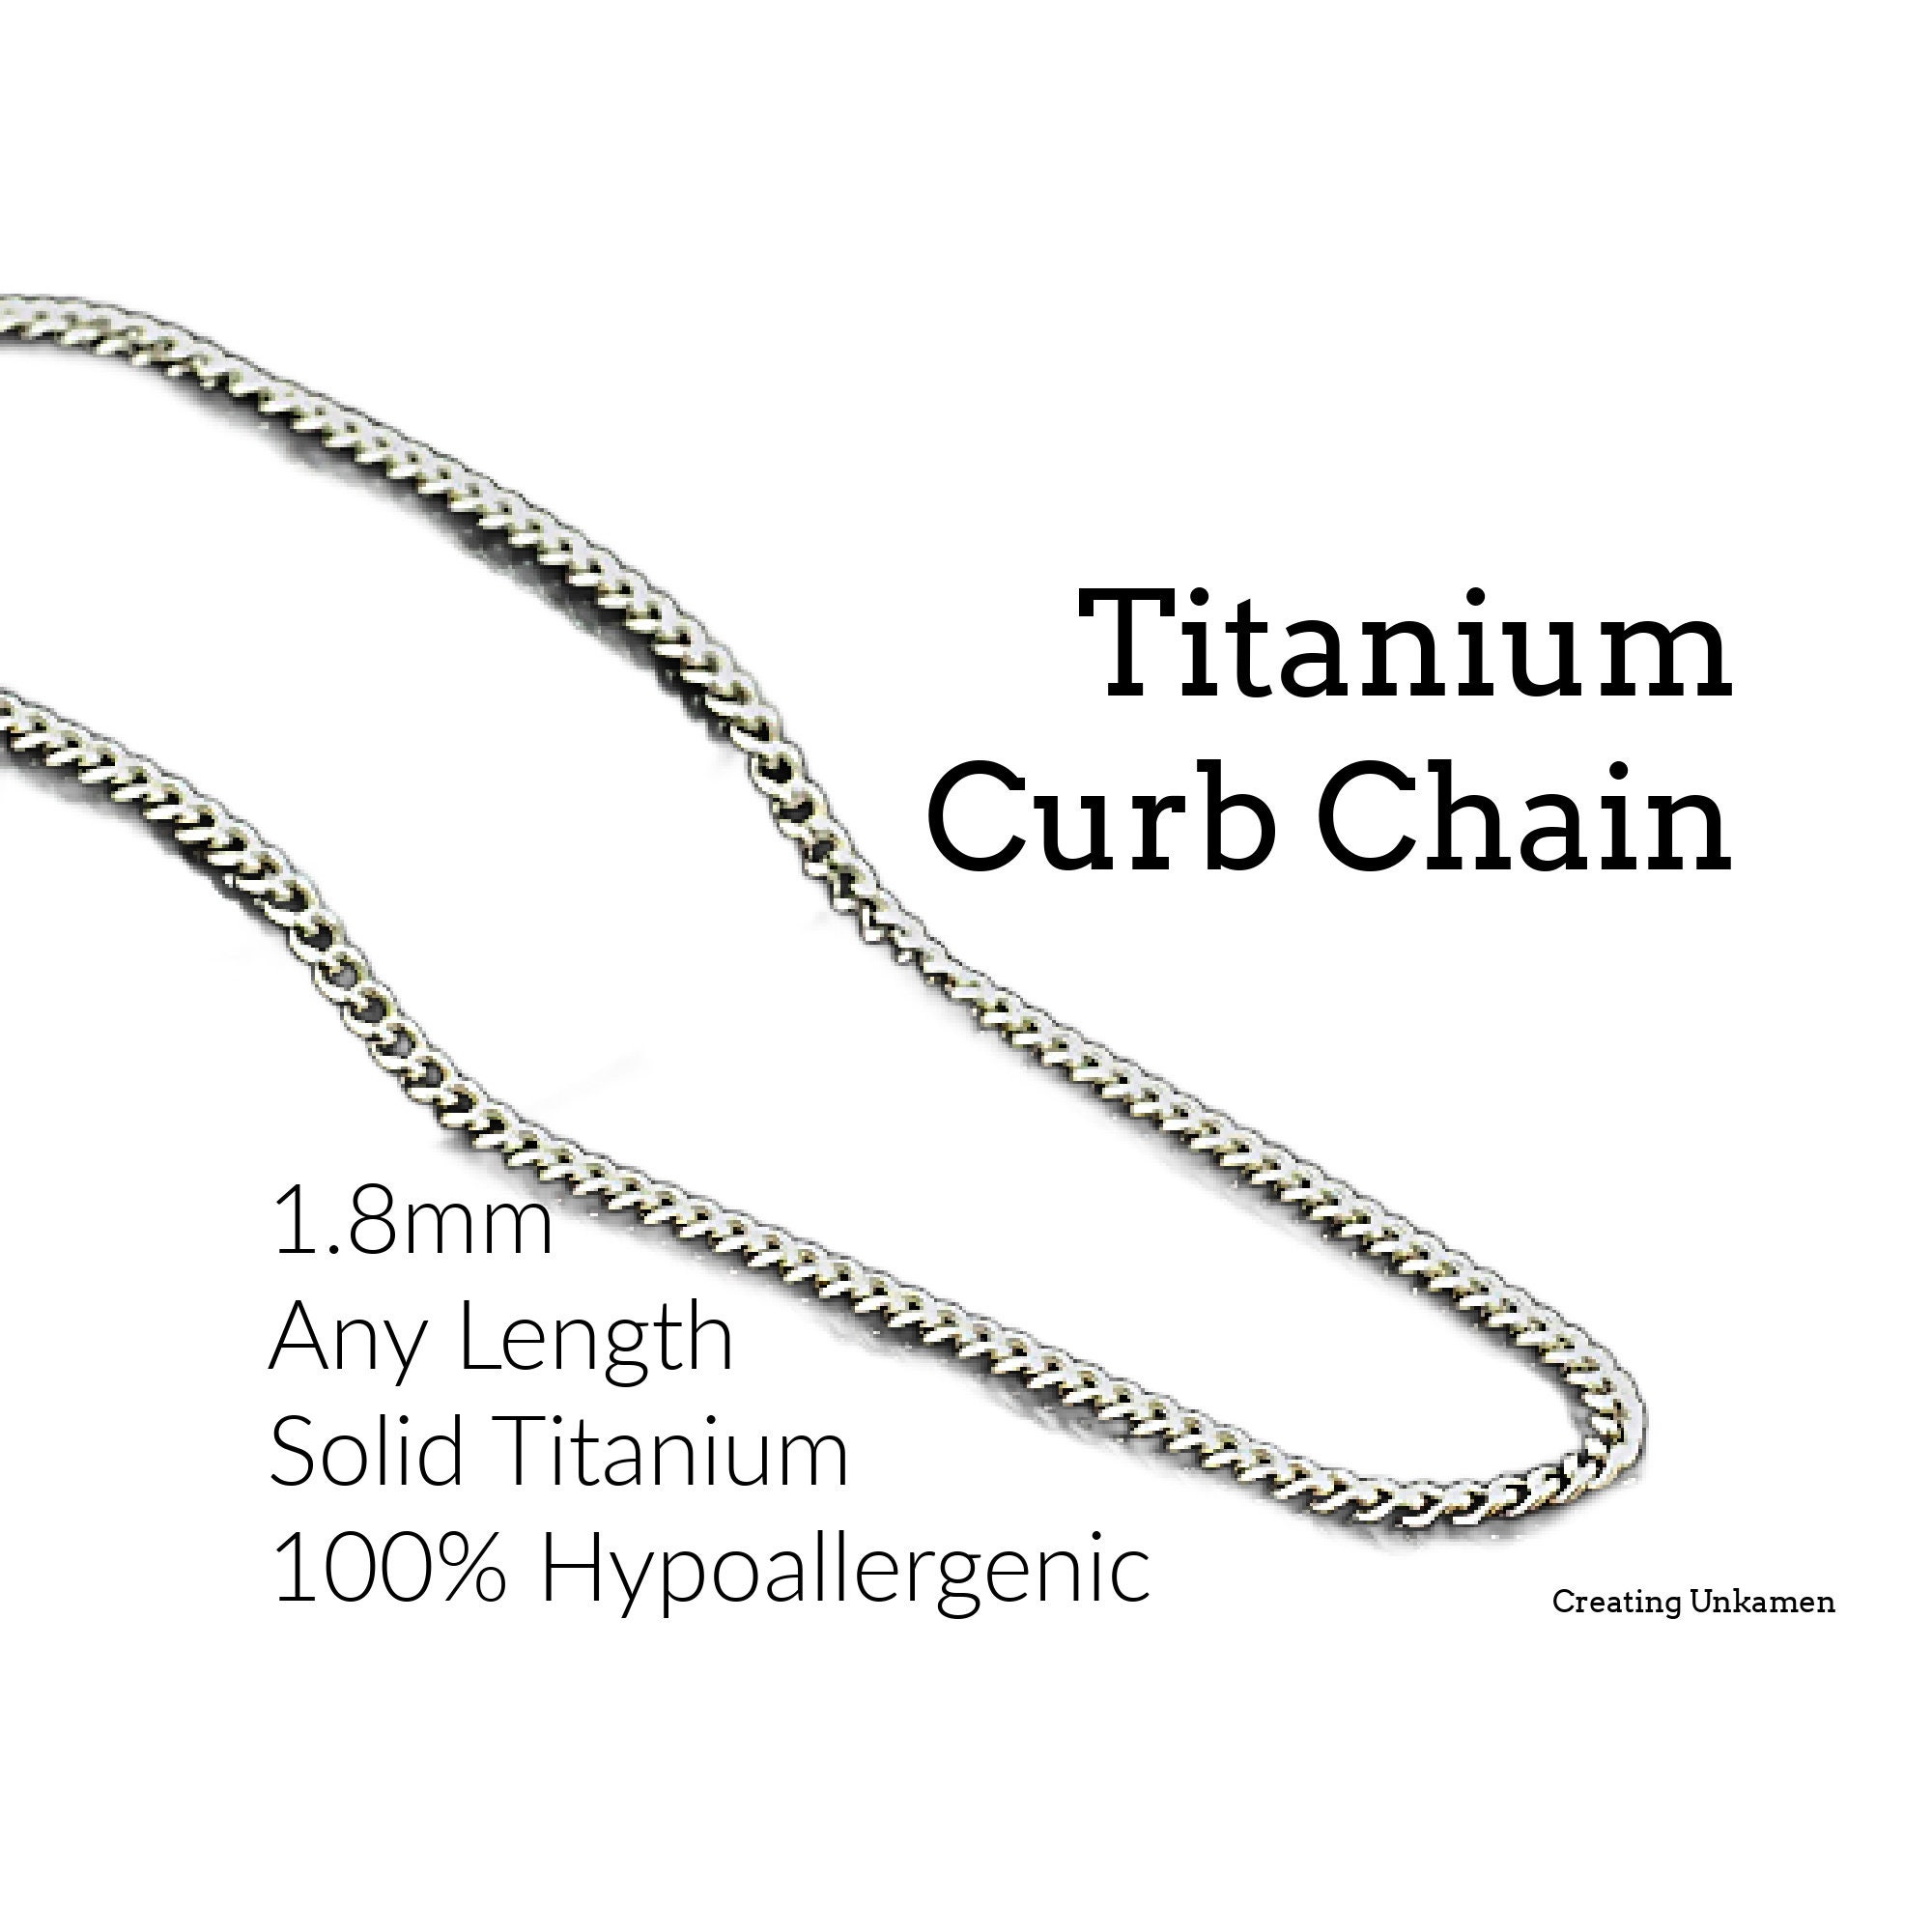 Tarnish Free Gold Necklaces for Women or Men, Stainless Steel Necklace  Wholesale Cable Link Chain Rolo Necklace for Jewelry Making 